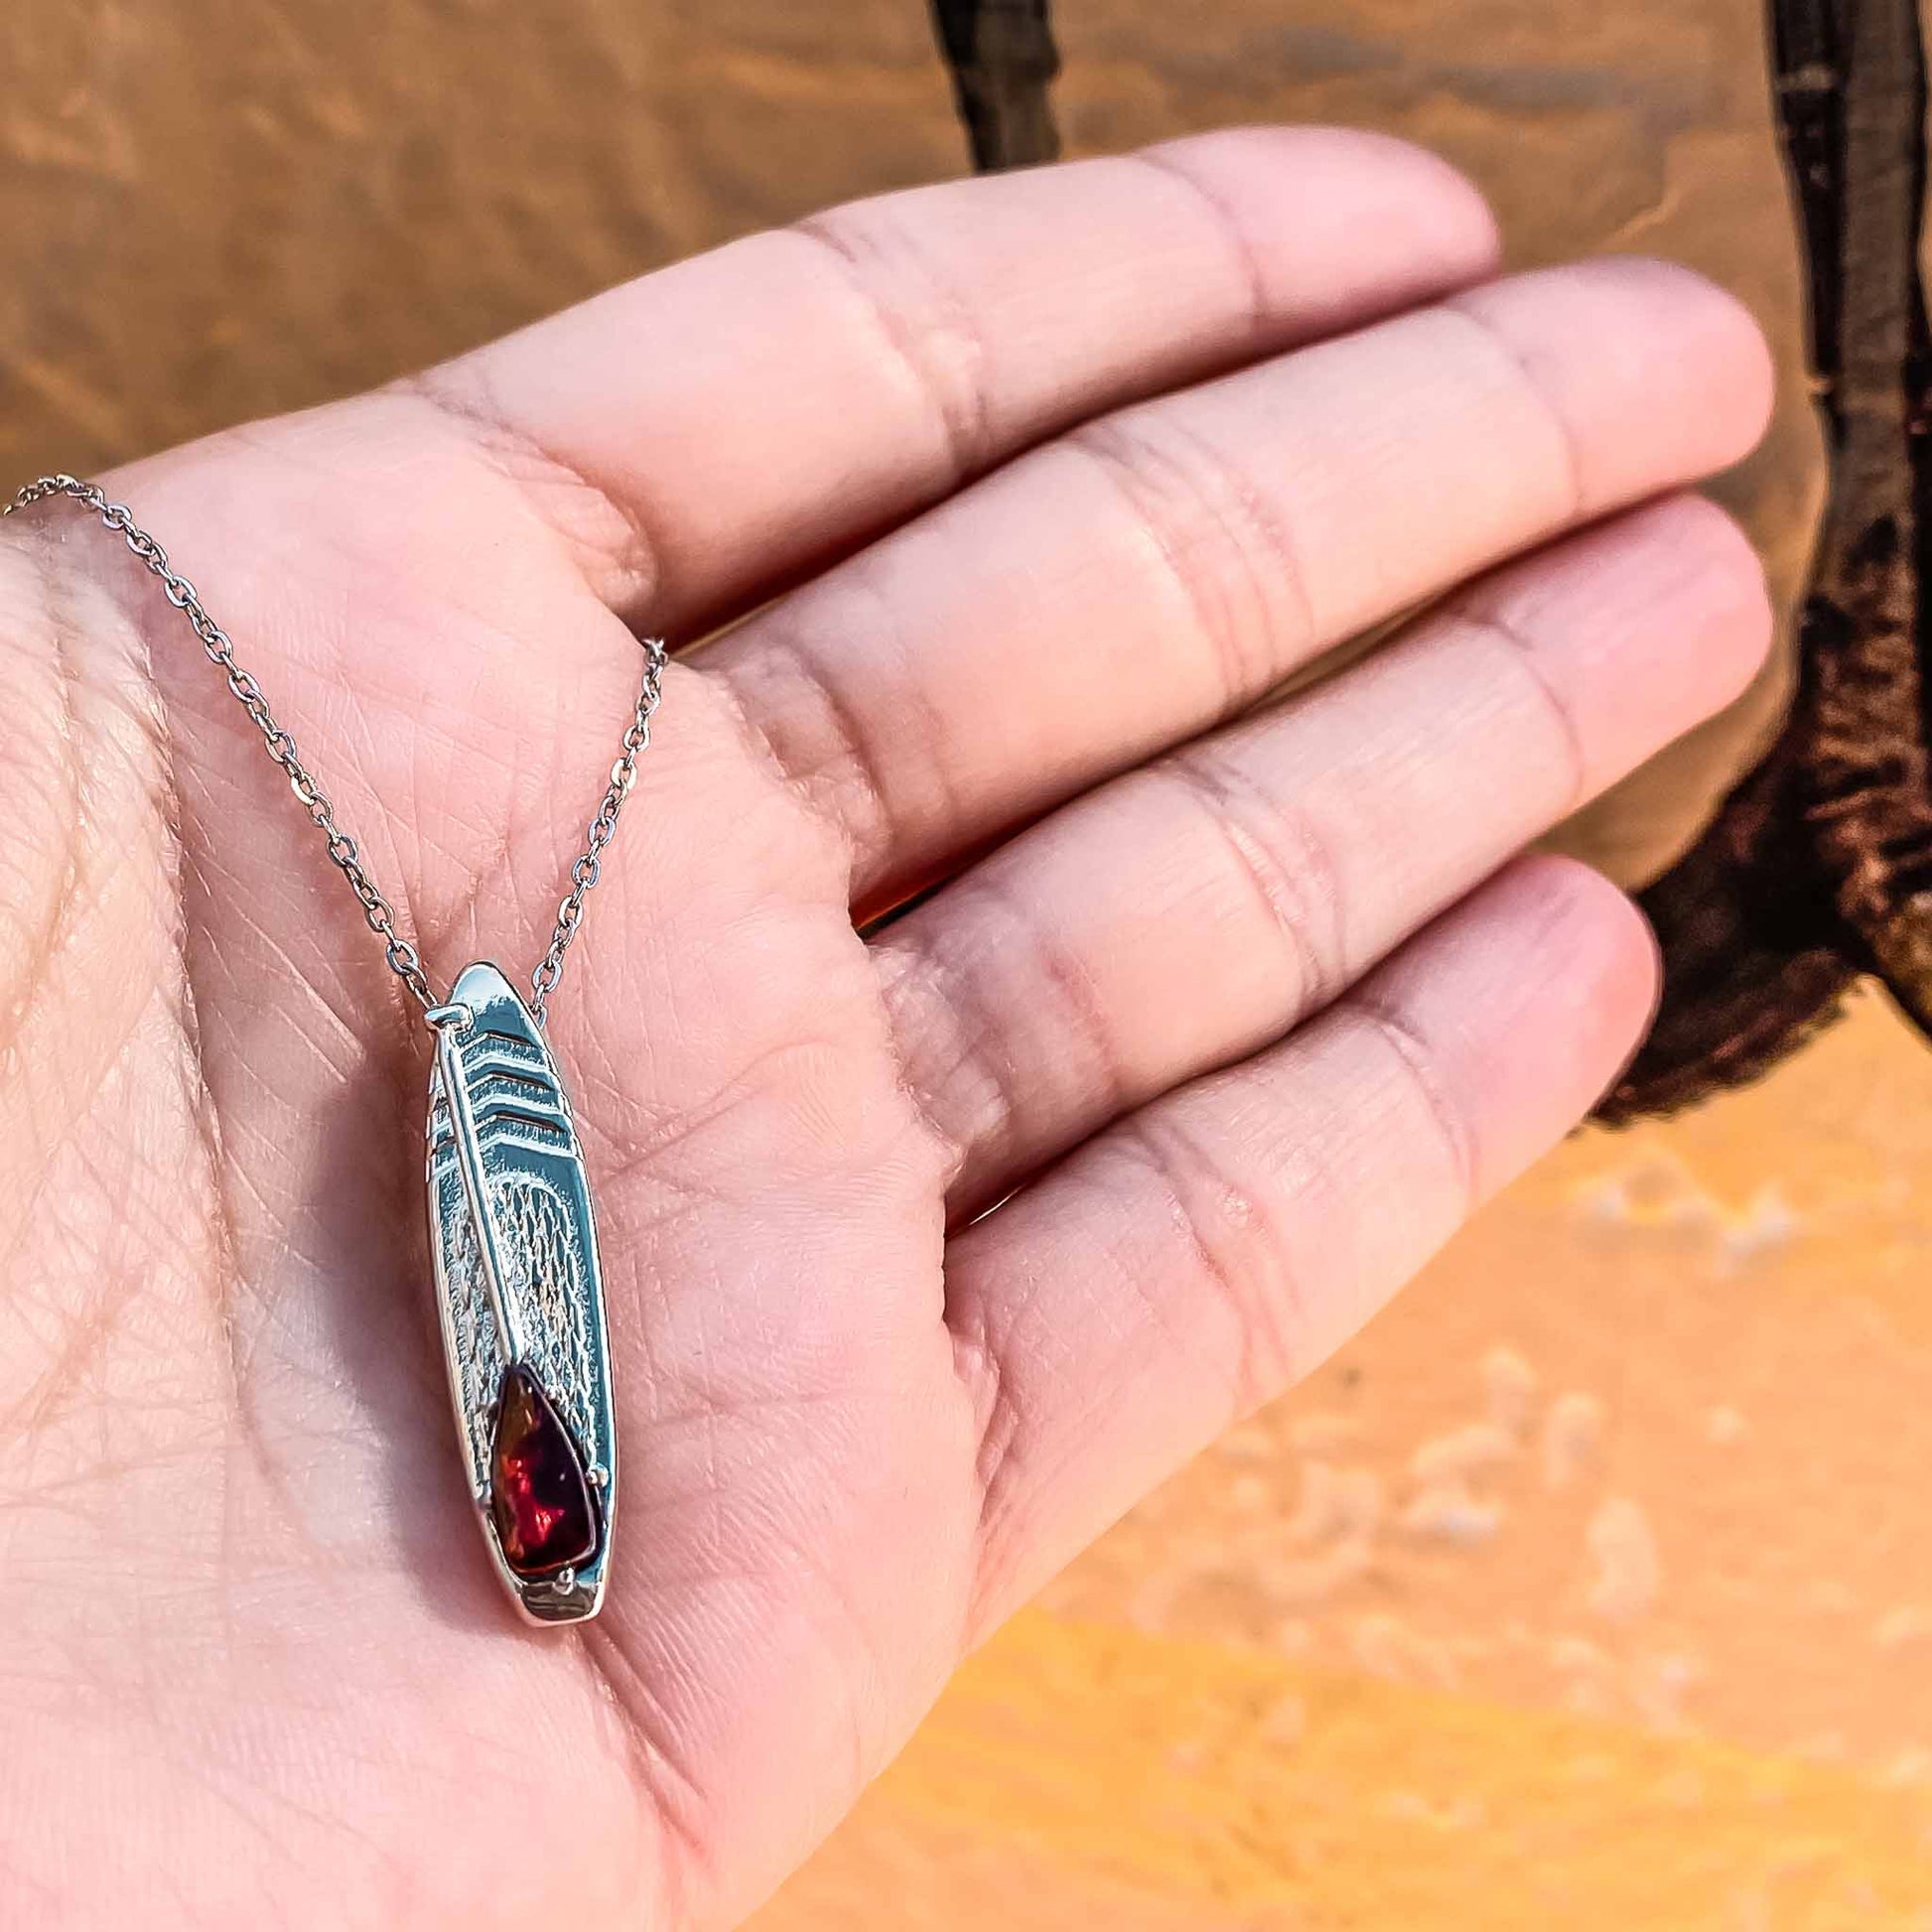 Looking for places to buy or rent a paddle board? This stand up paddle board pendant will be the best and highest performance SUP you'll ever find. Take your paddle board with you, even when you're not surfing, racing or touring. Shop January's birthstone SUP jewelry online or at a surf shop near you.